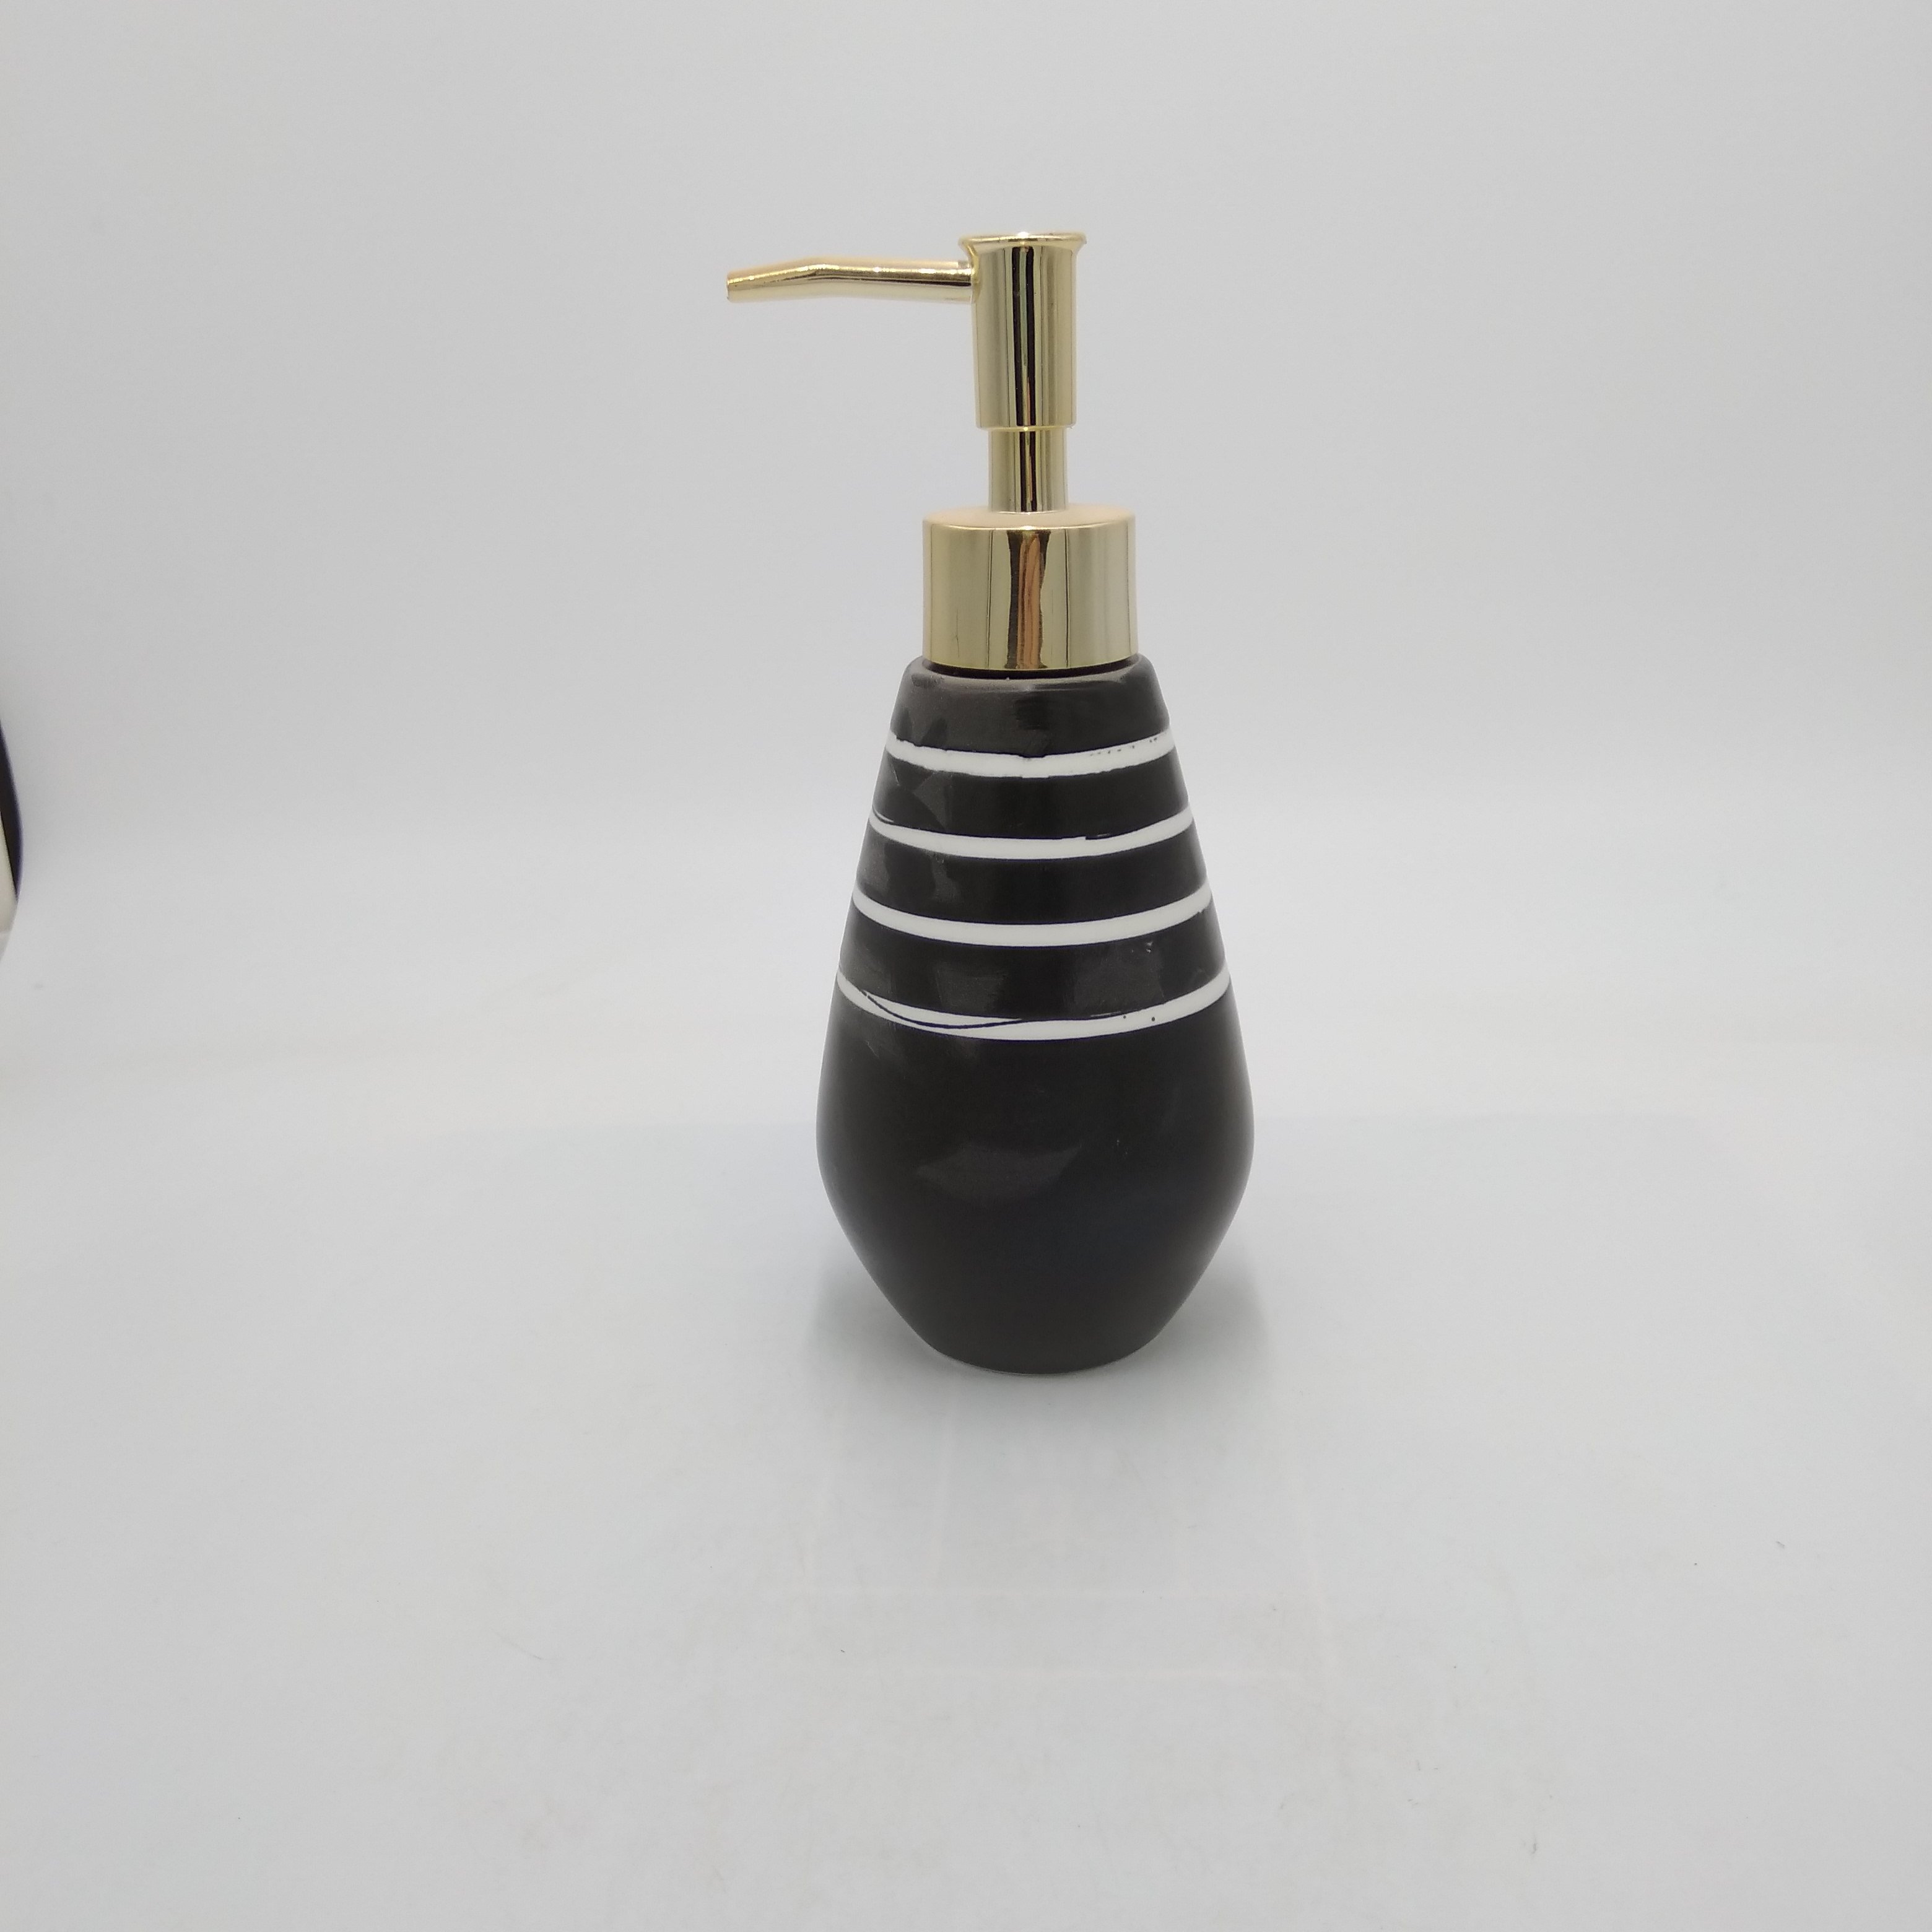 Ceramic Soap & Lotion Dispenser Pump with White Finished for Kitchen or Bathroom Countertops